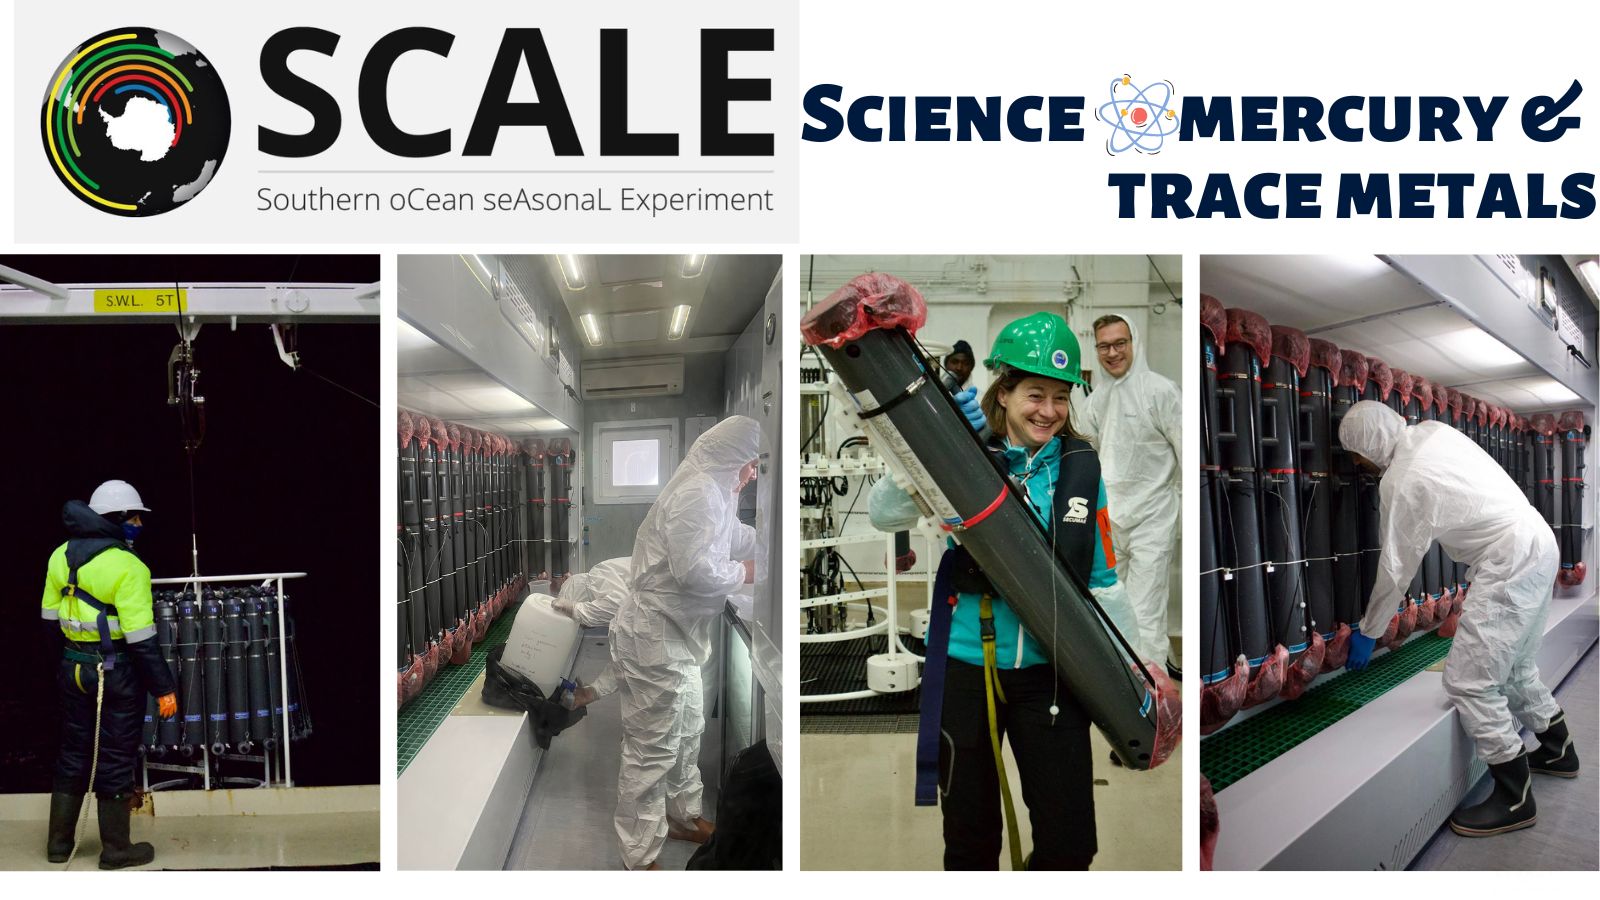 SCALE-WIN22: Science Team MERCURY & TRACE METALS - South African